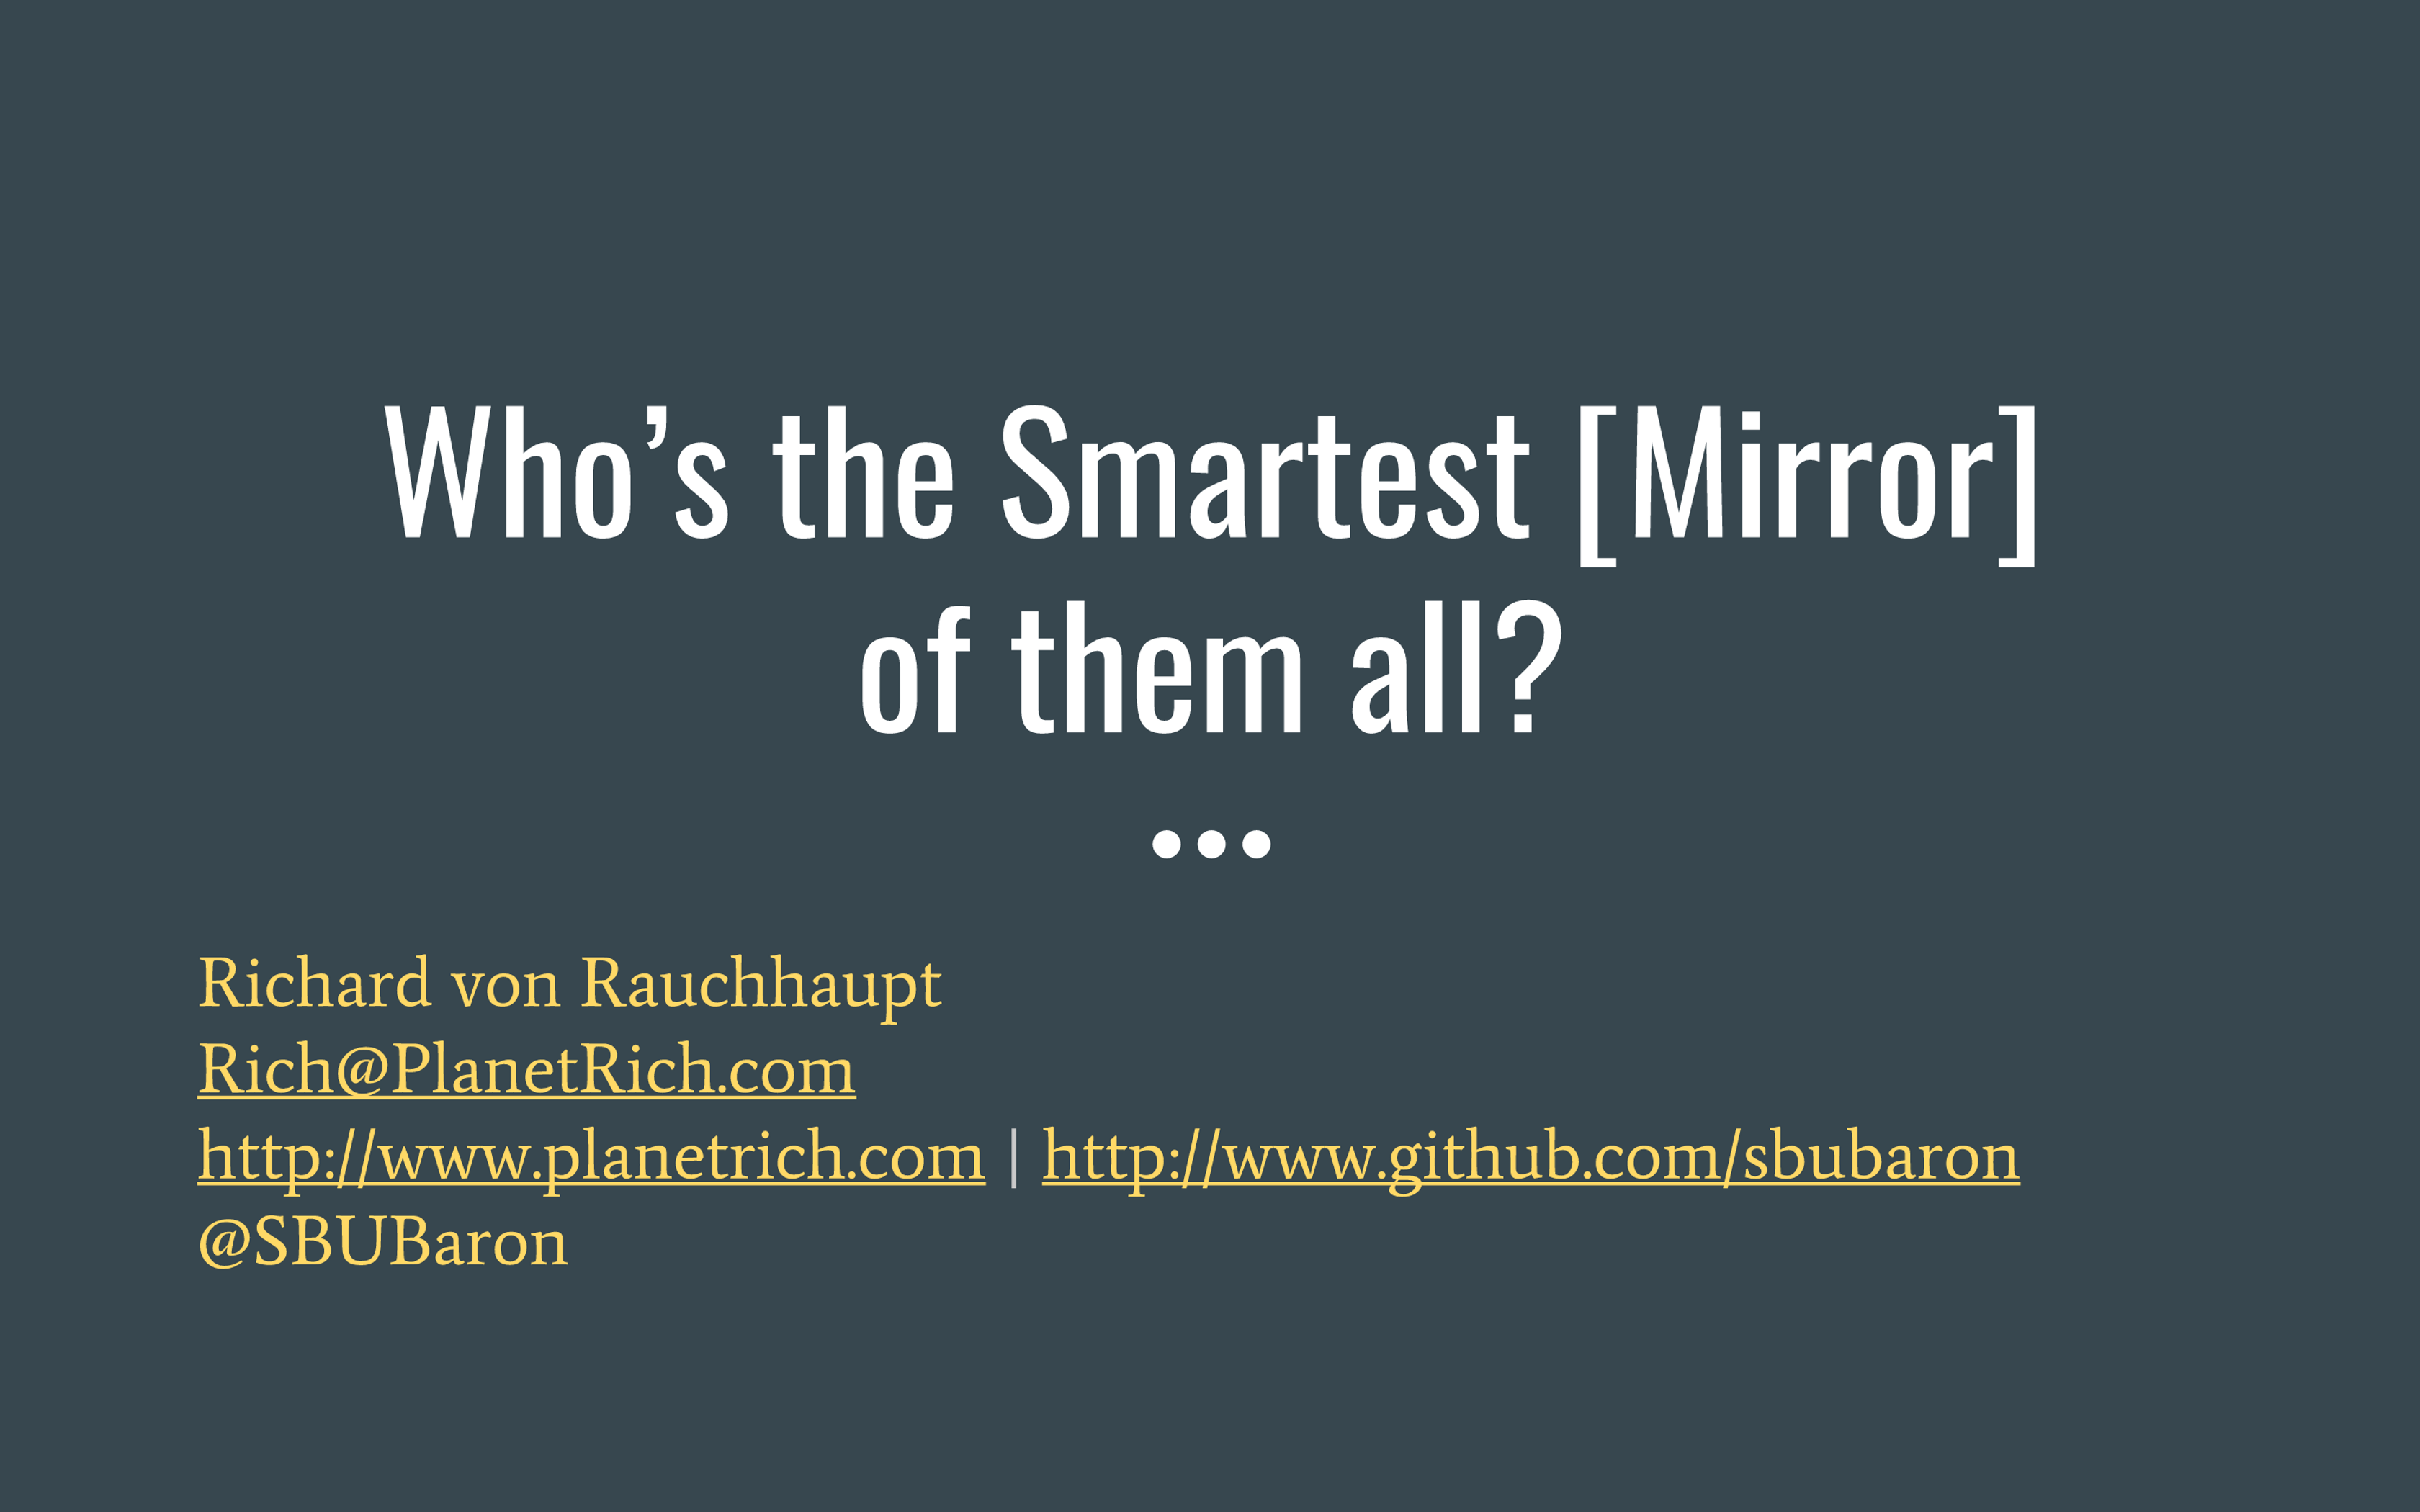 Who's the Smartest [Mirror] of Them All?